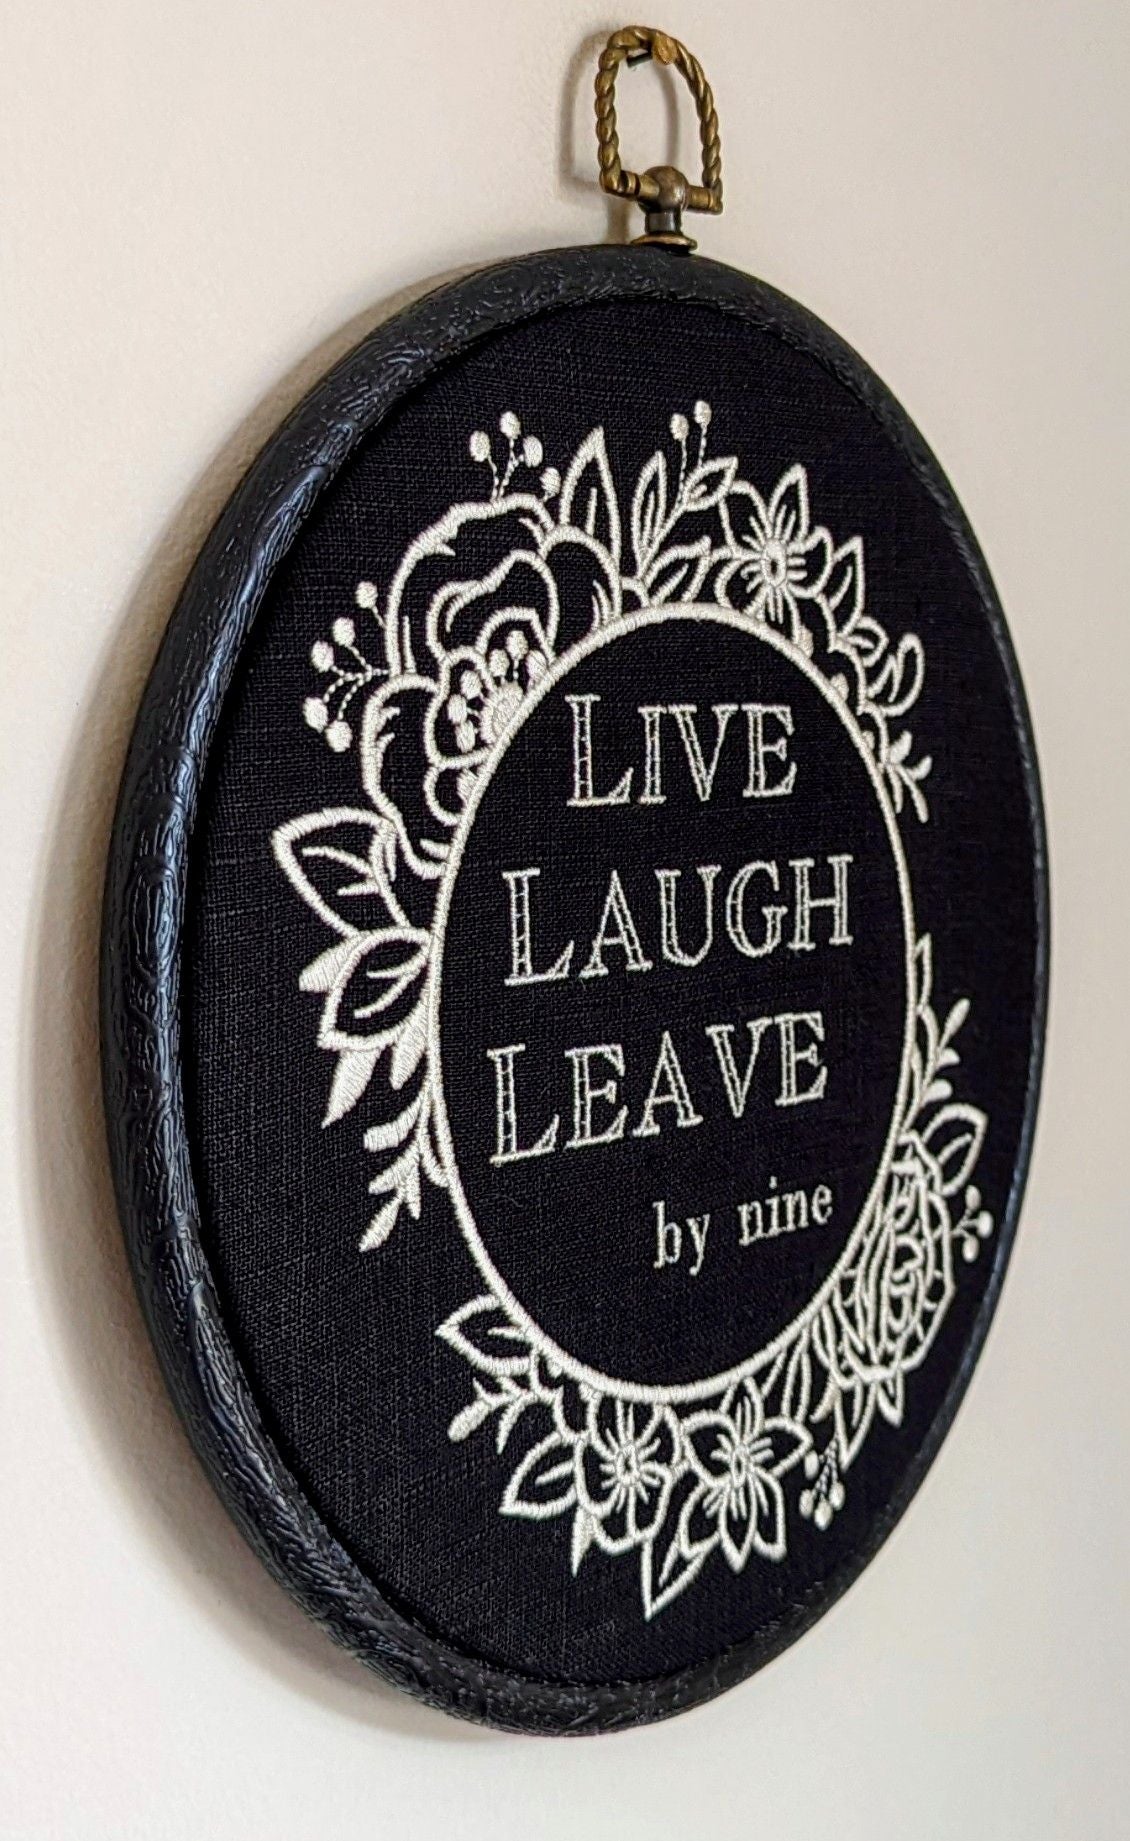 Live Laugh Leave by nine. Machine embroidery 8" hoop art